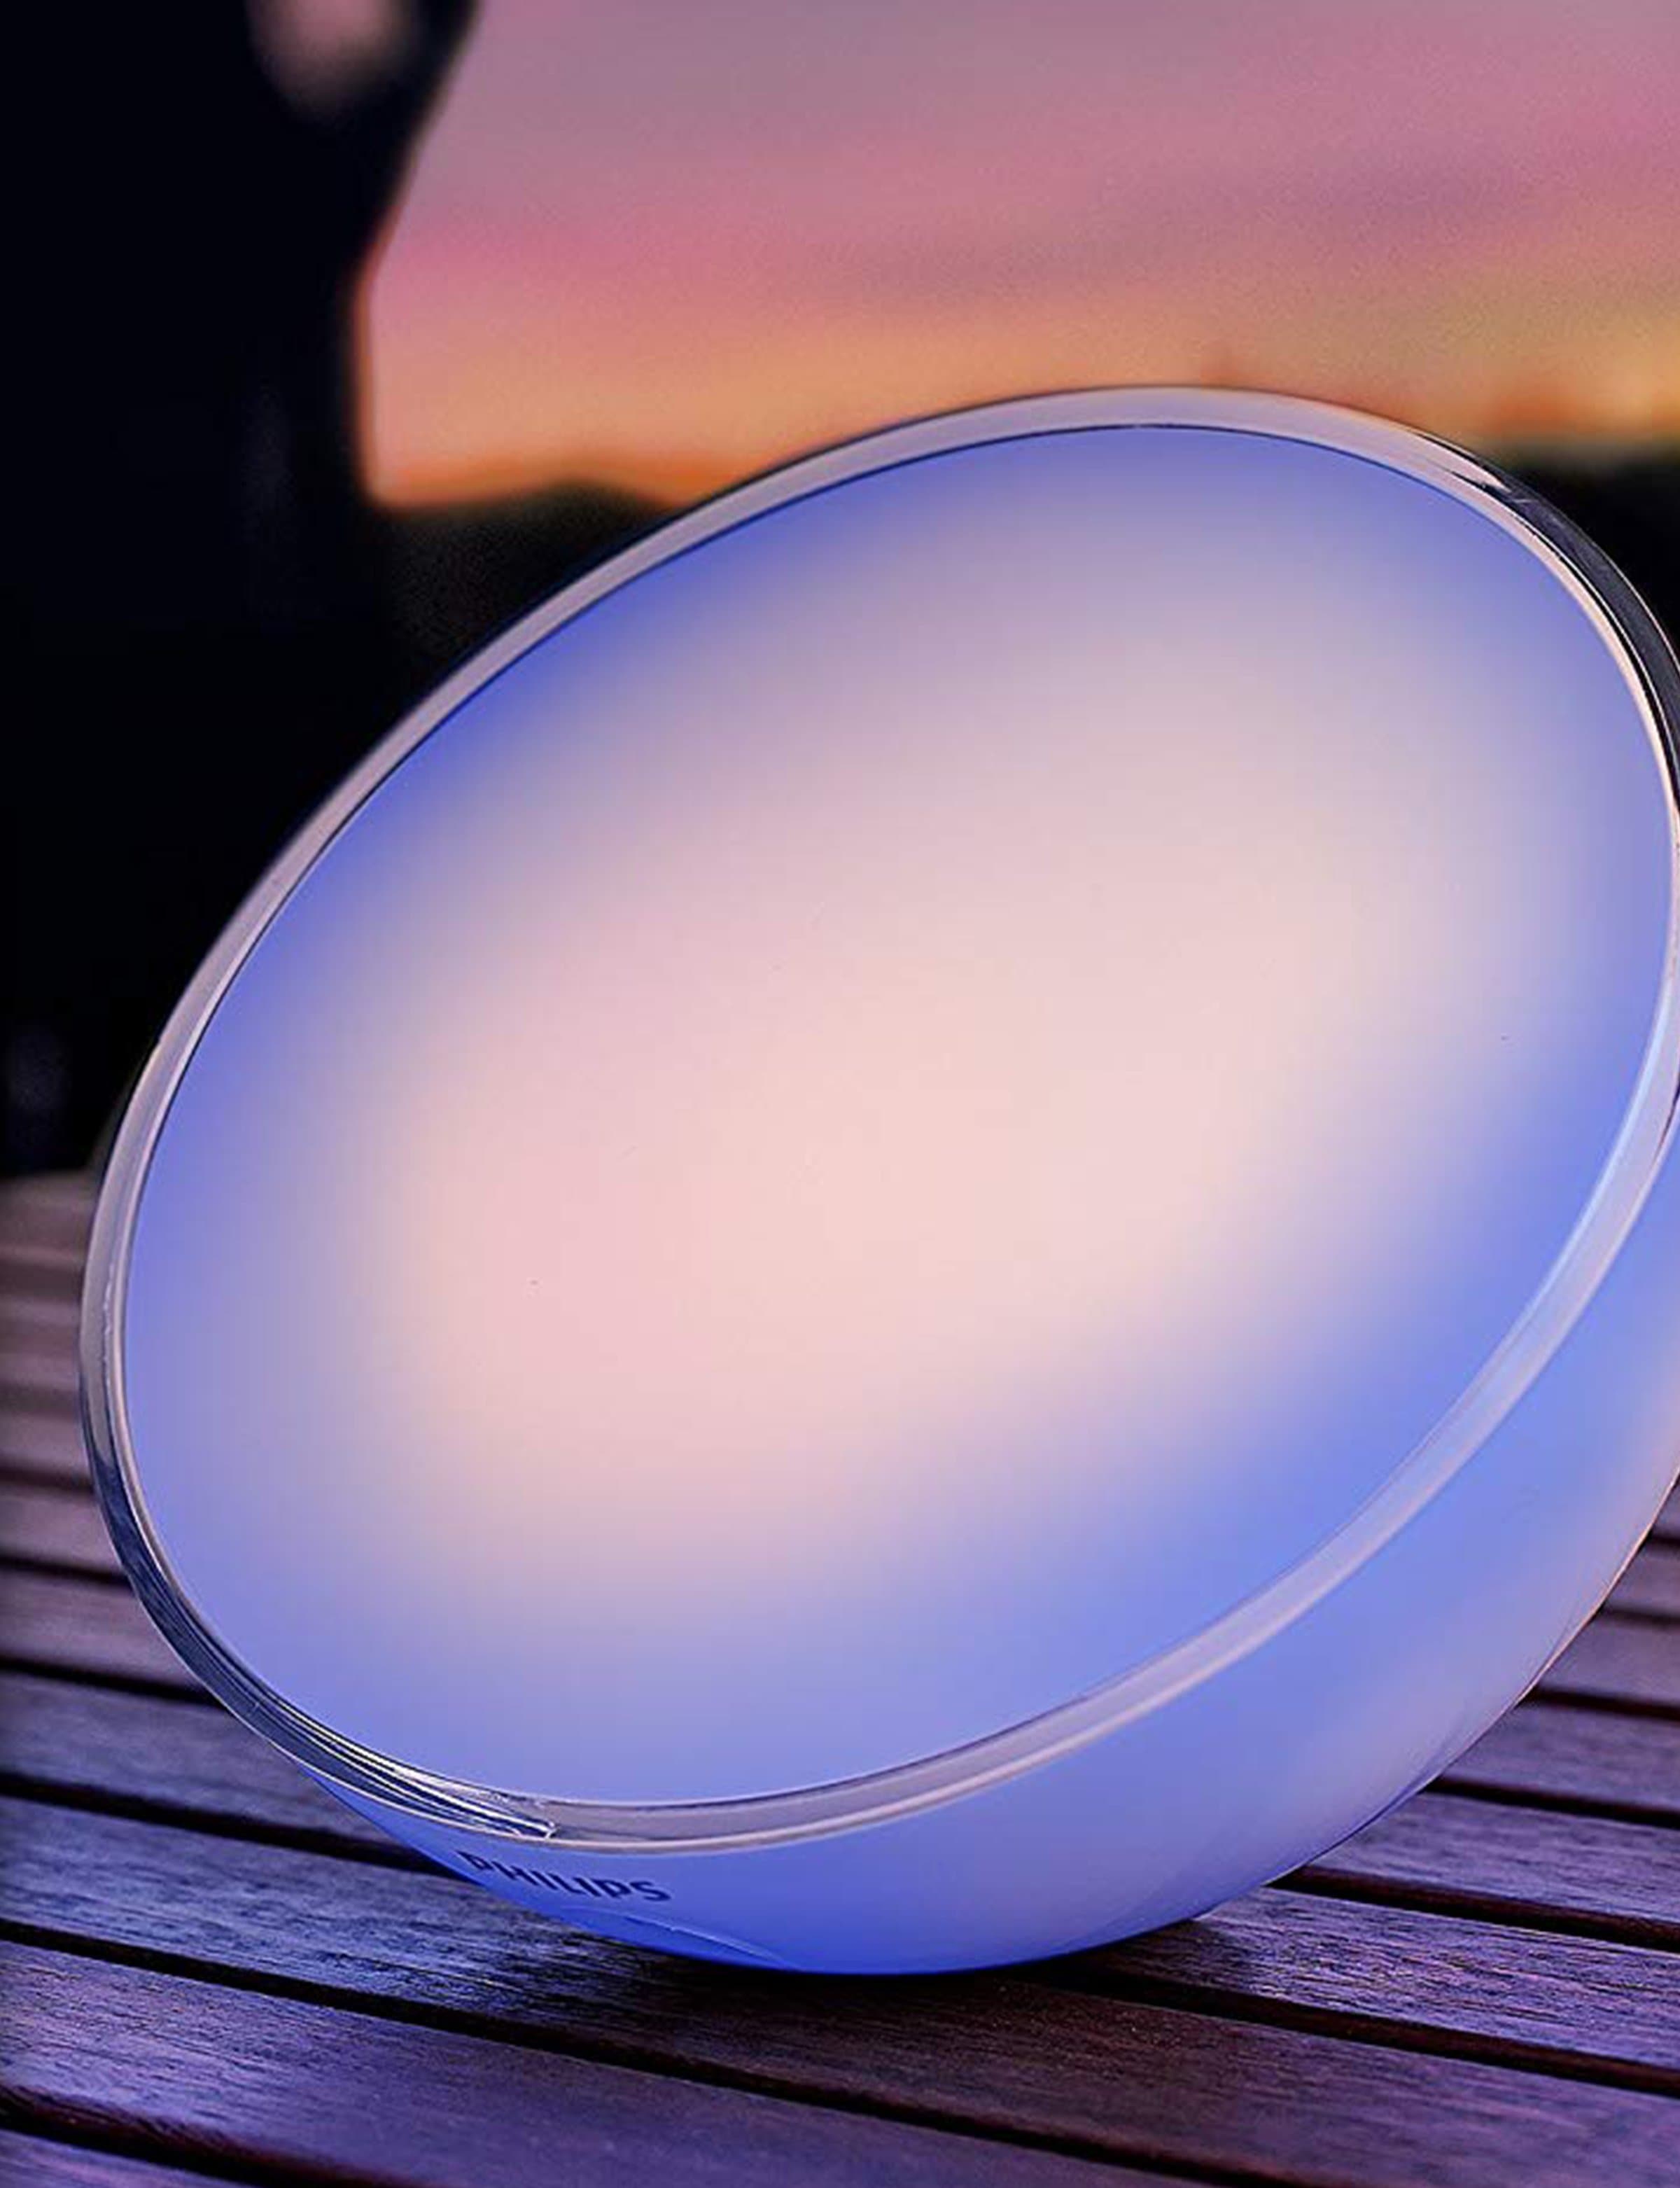 Philips Hue Go - District